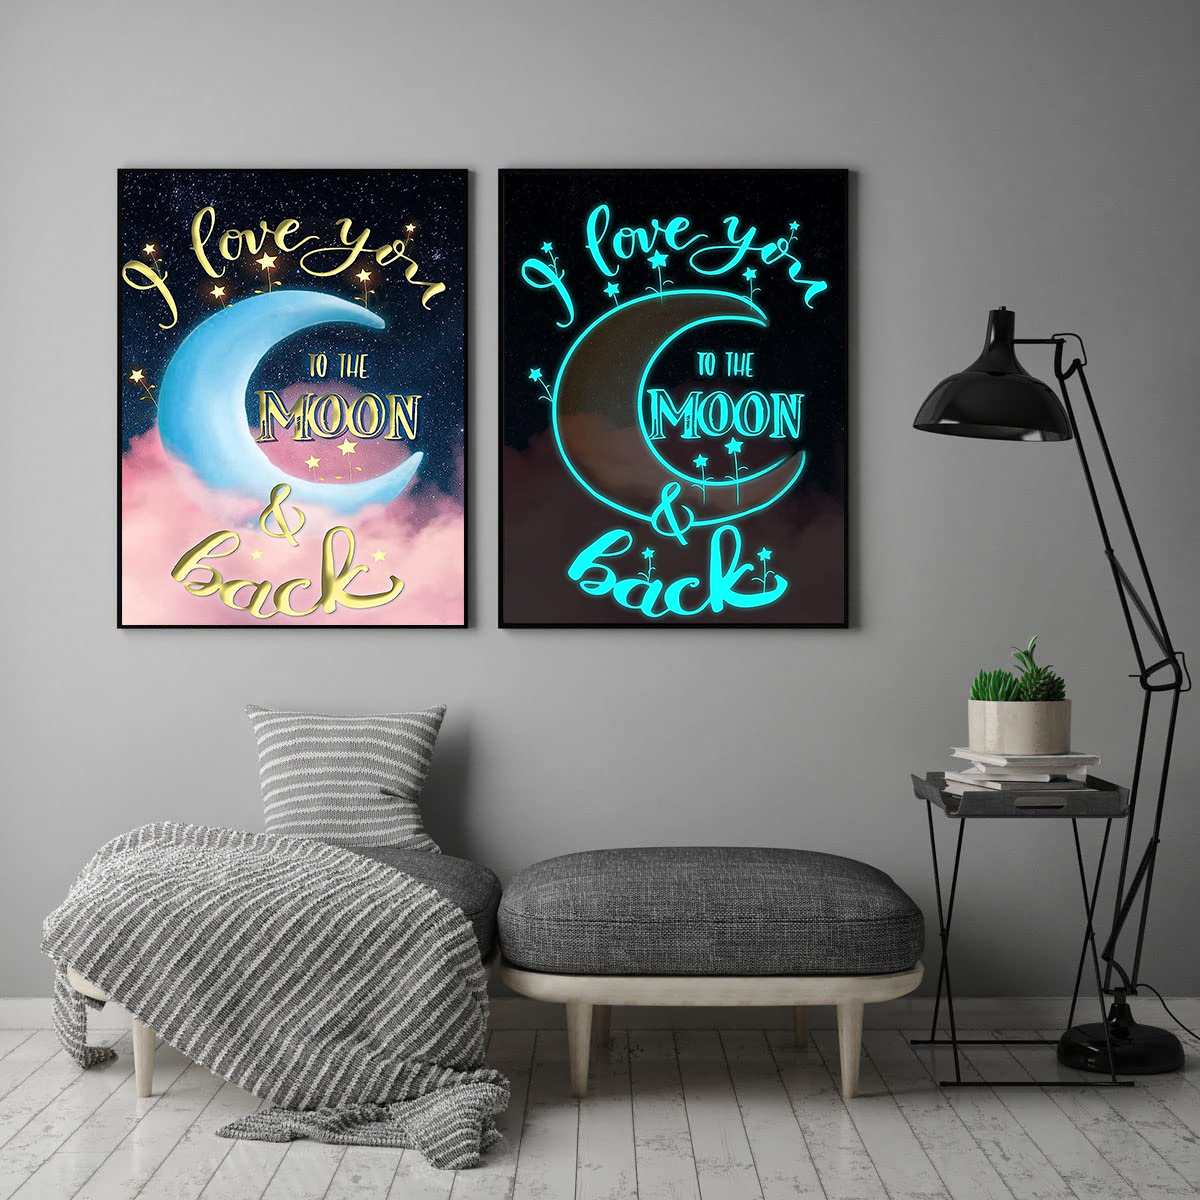 Love You To The Moon And Back Stitch - 5D Diamond Painting 